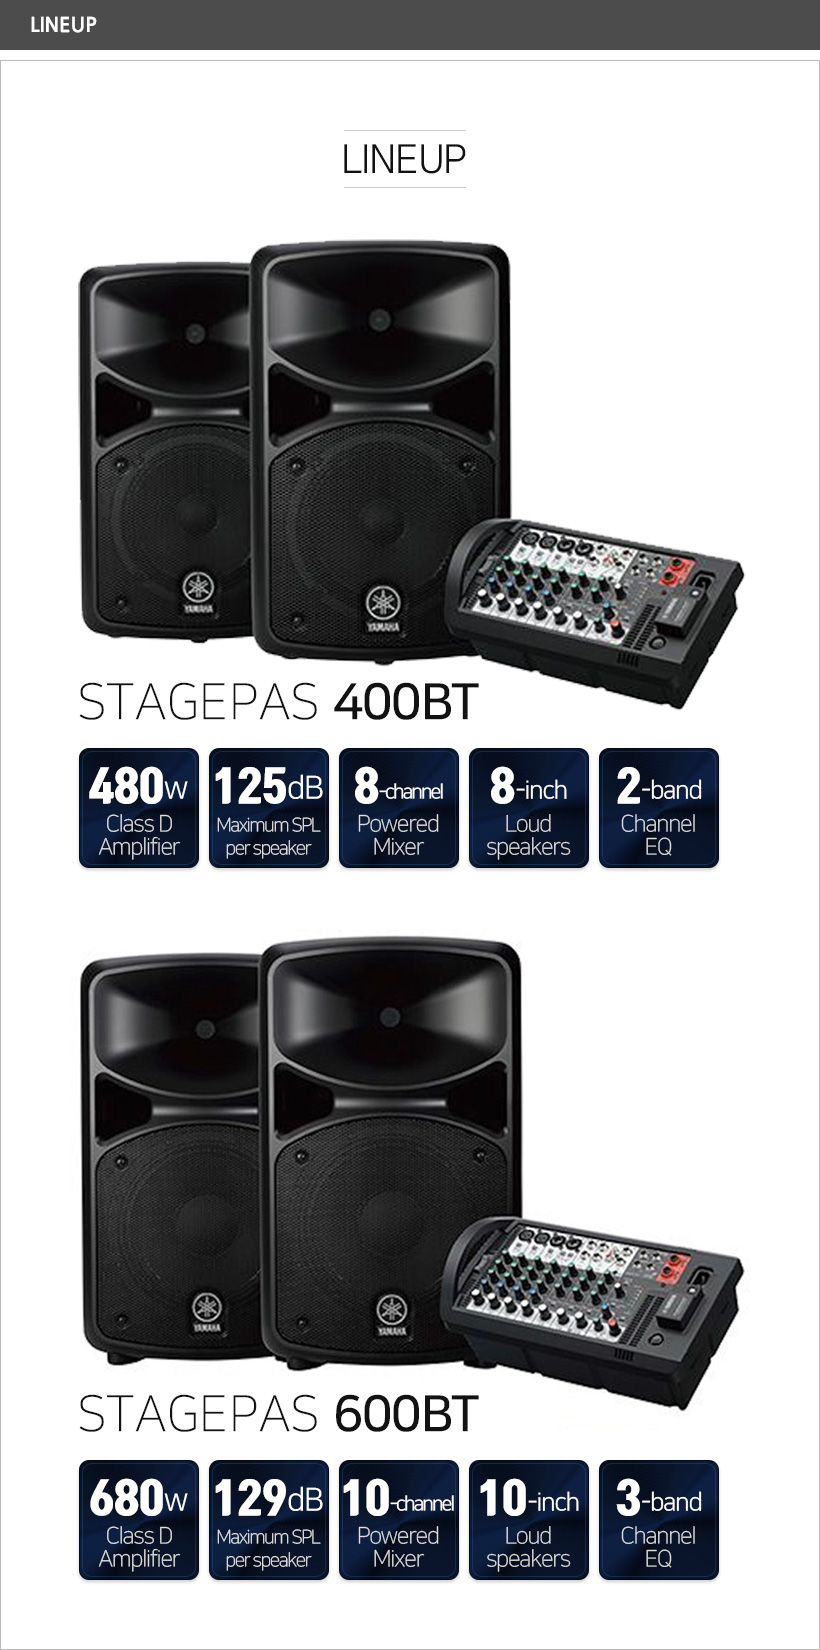 STAGEPAS 400BT LINEUP